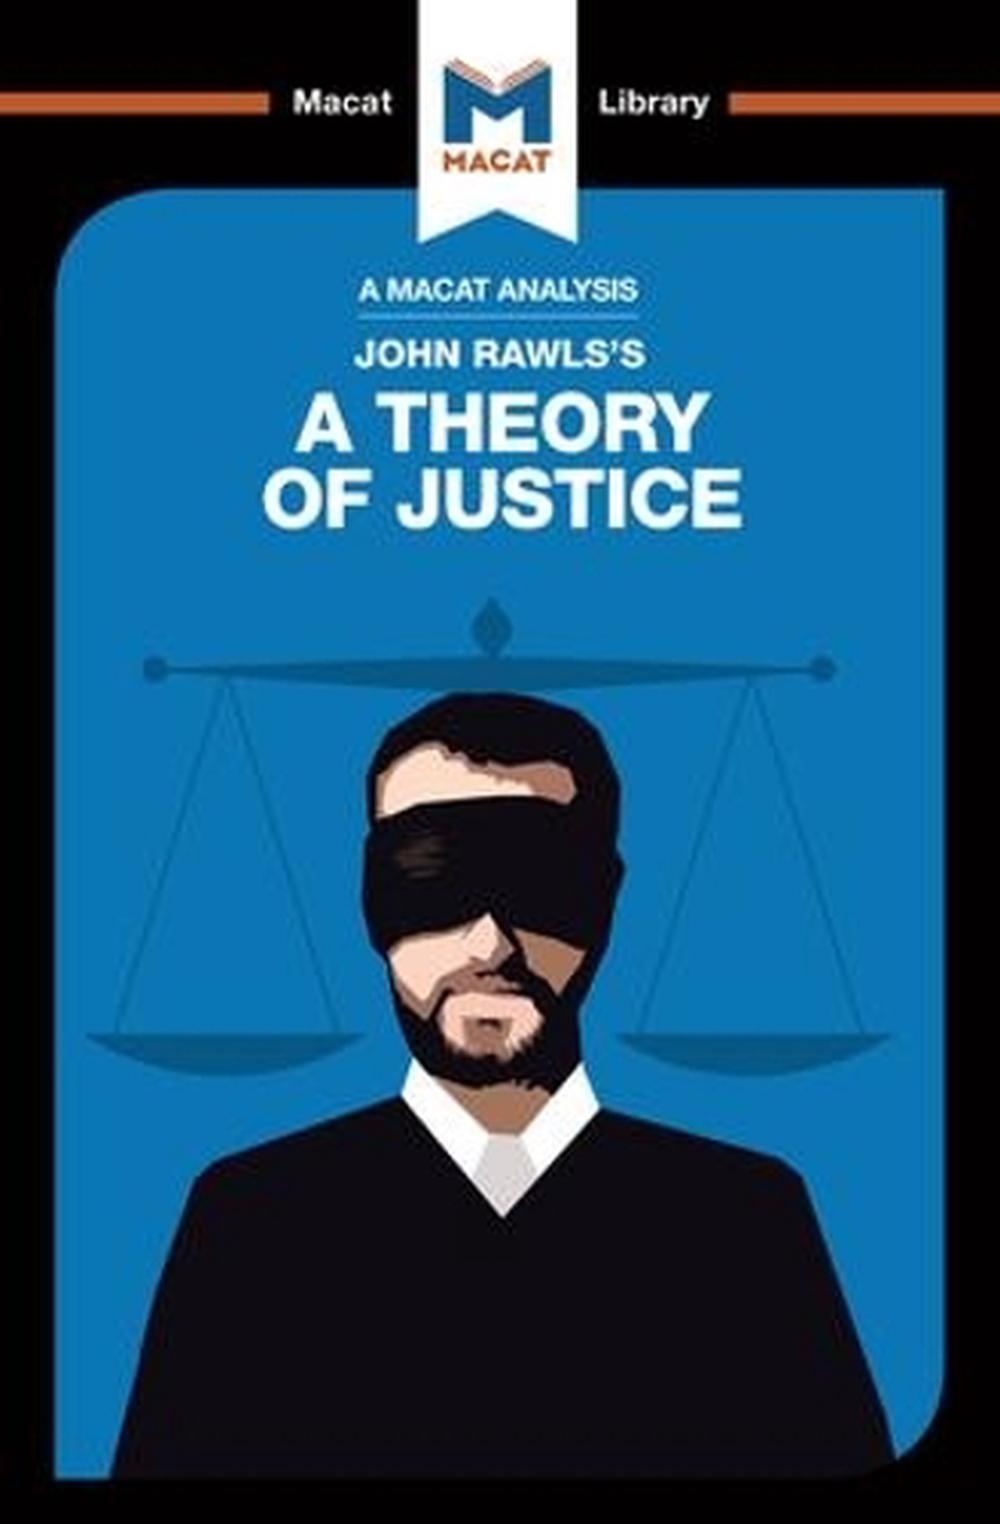 analysis-of-john-rawls-s-a-theory-of-justice-by-filippo-dionigi